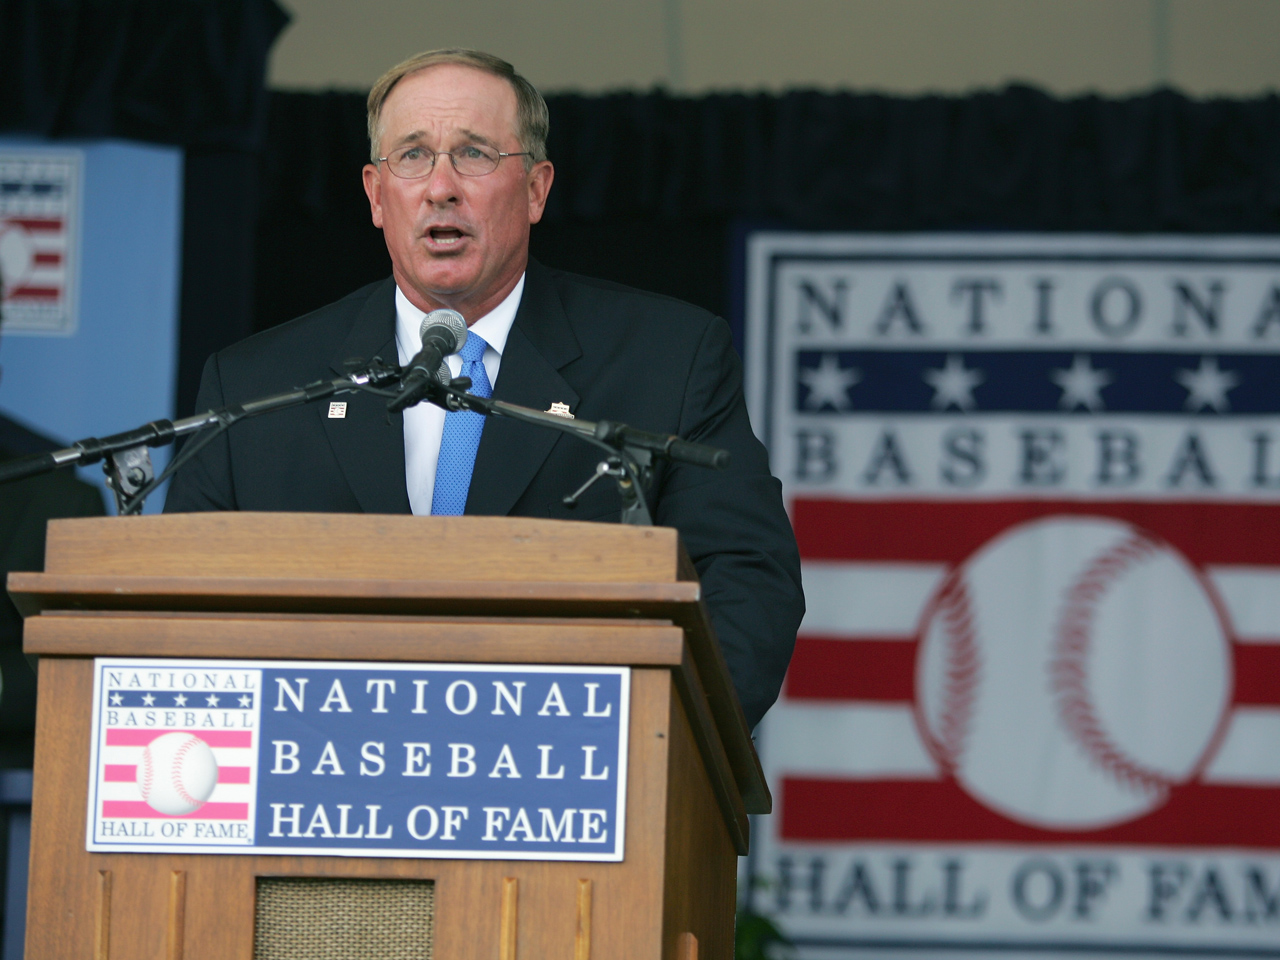 Gary Carter Hall of Fame speech: This kid is in the candy store - CBS News